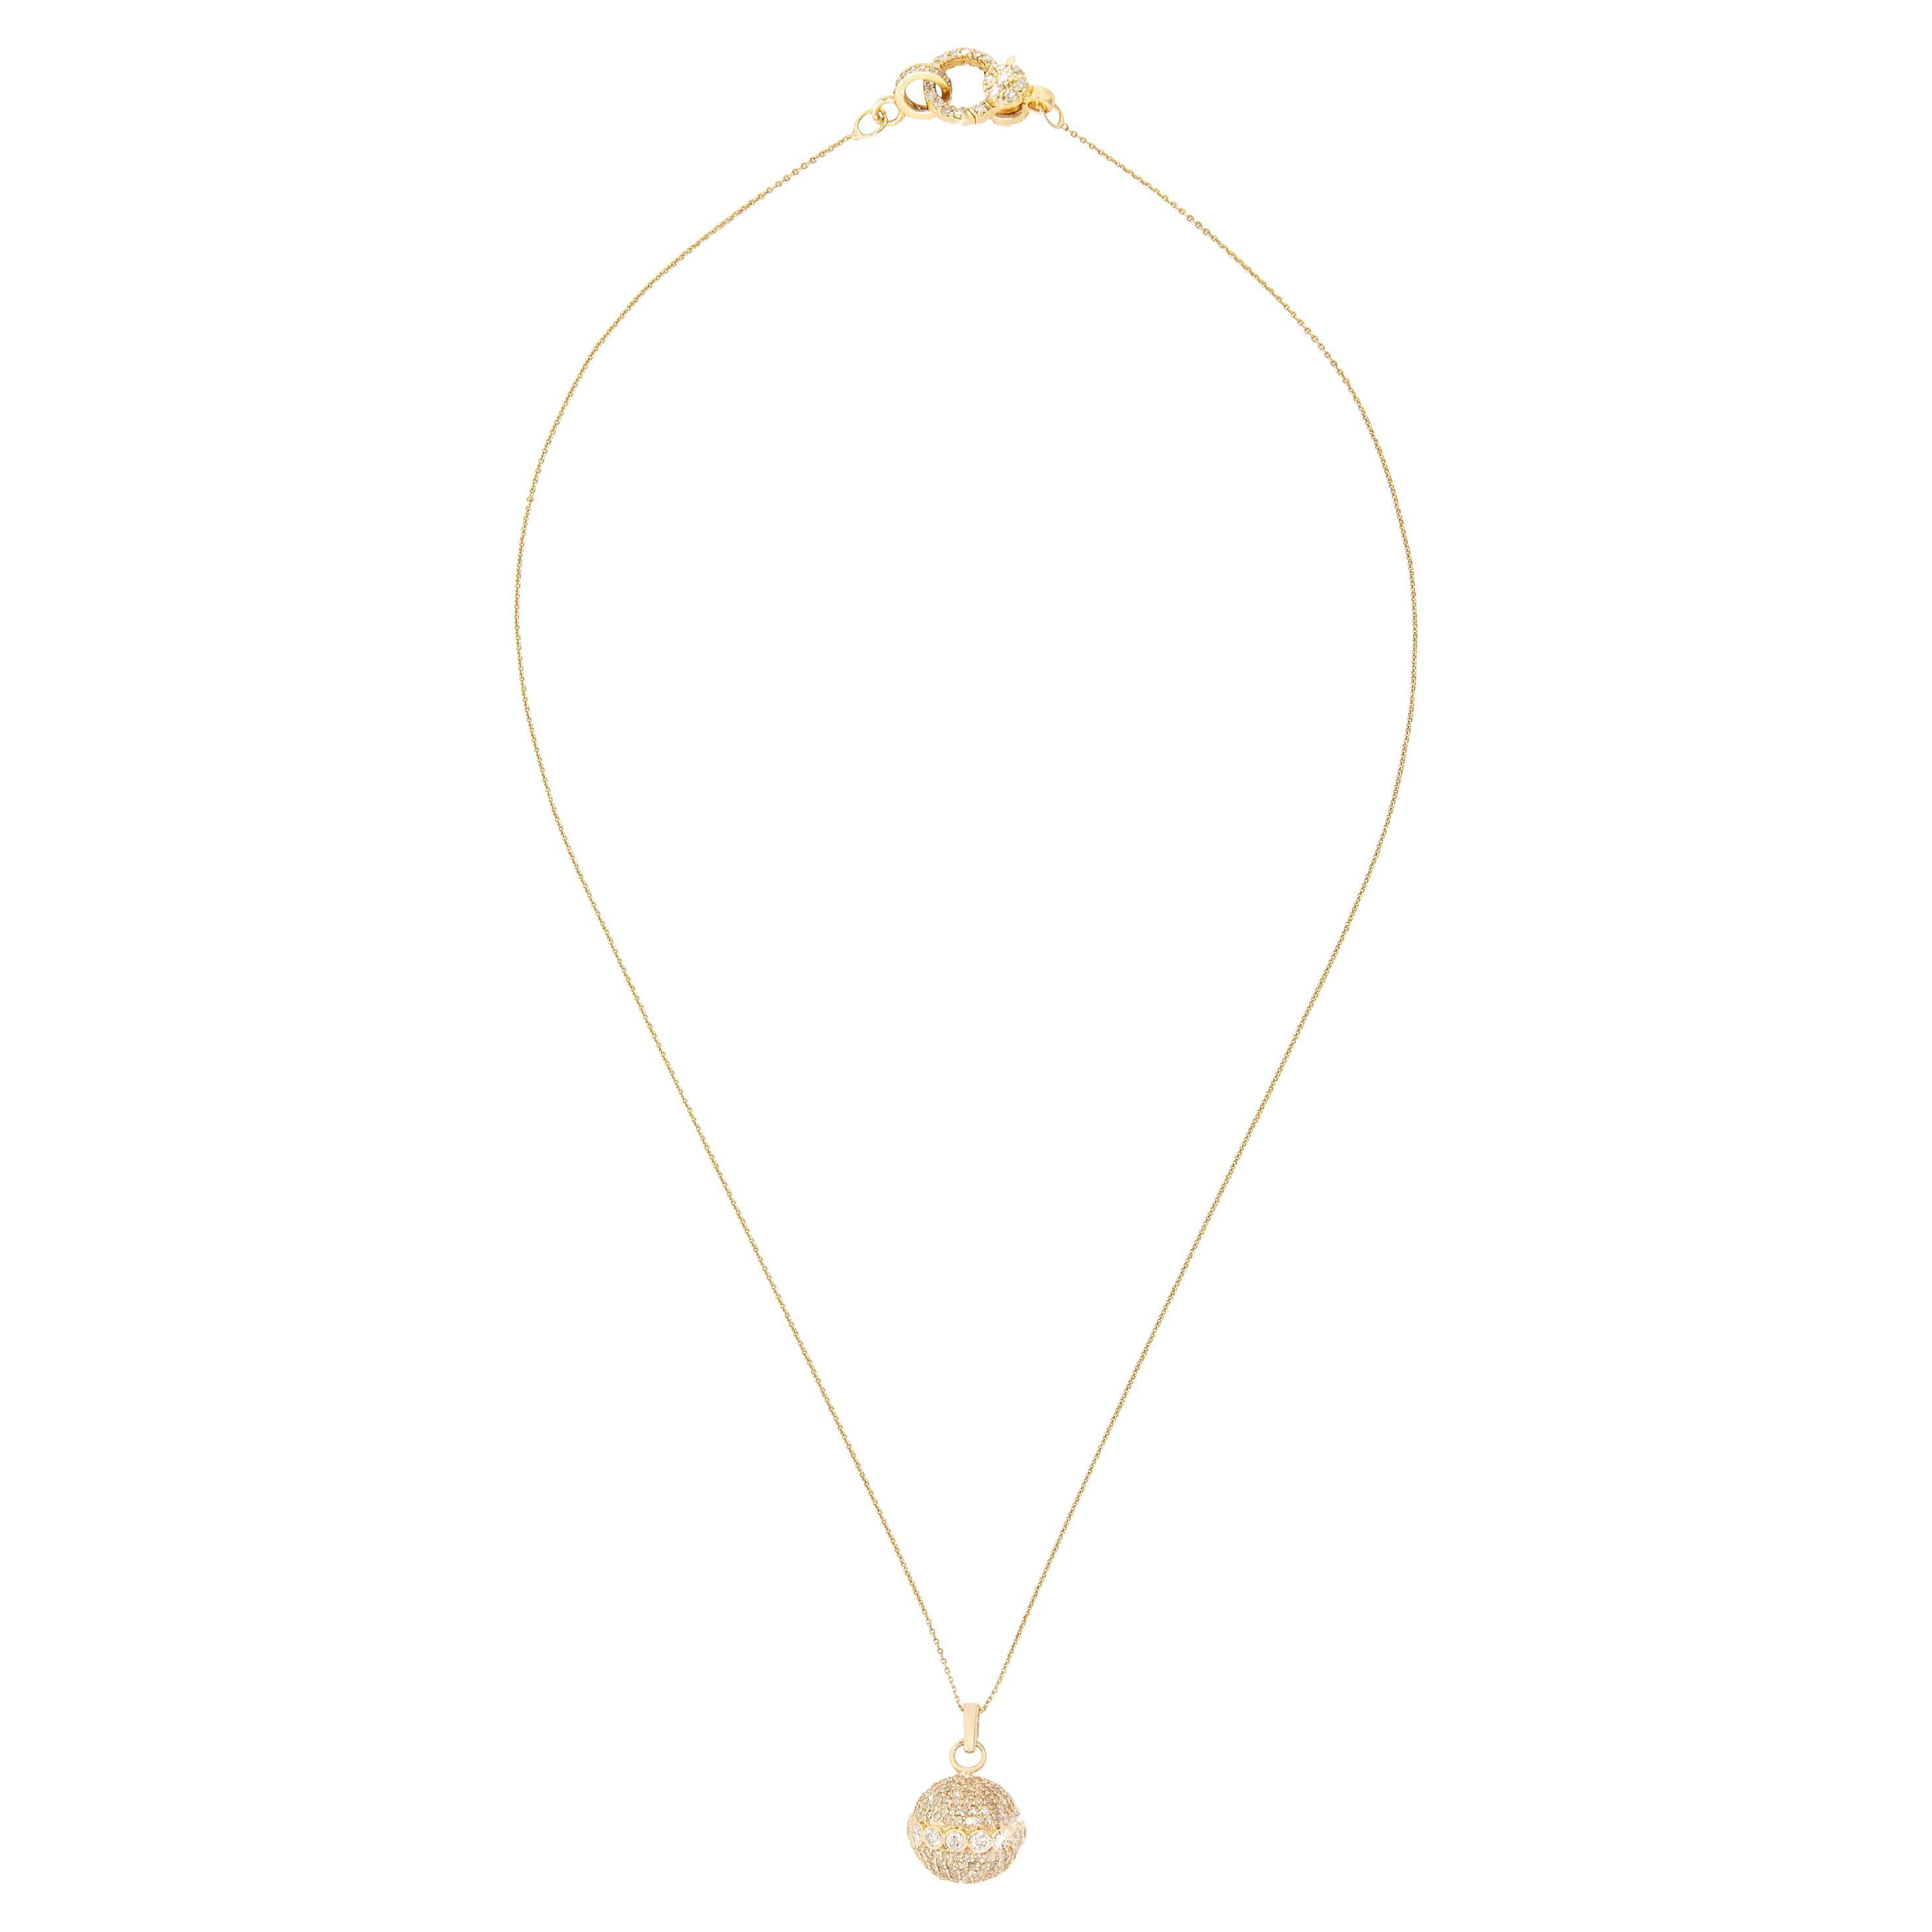 This 18k YG necklace showcases the house´s signature dazzling diamond orb with a brilliant-cut belt and a double-sided diamond-encrusted clasp. Designed for elegance this light delicate, made-to-last necklace can easily be paired with other